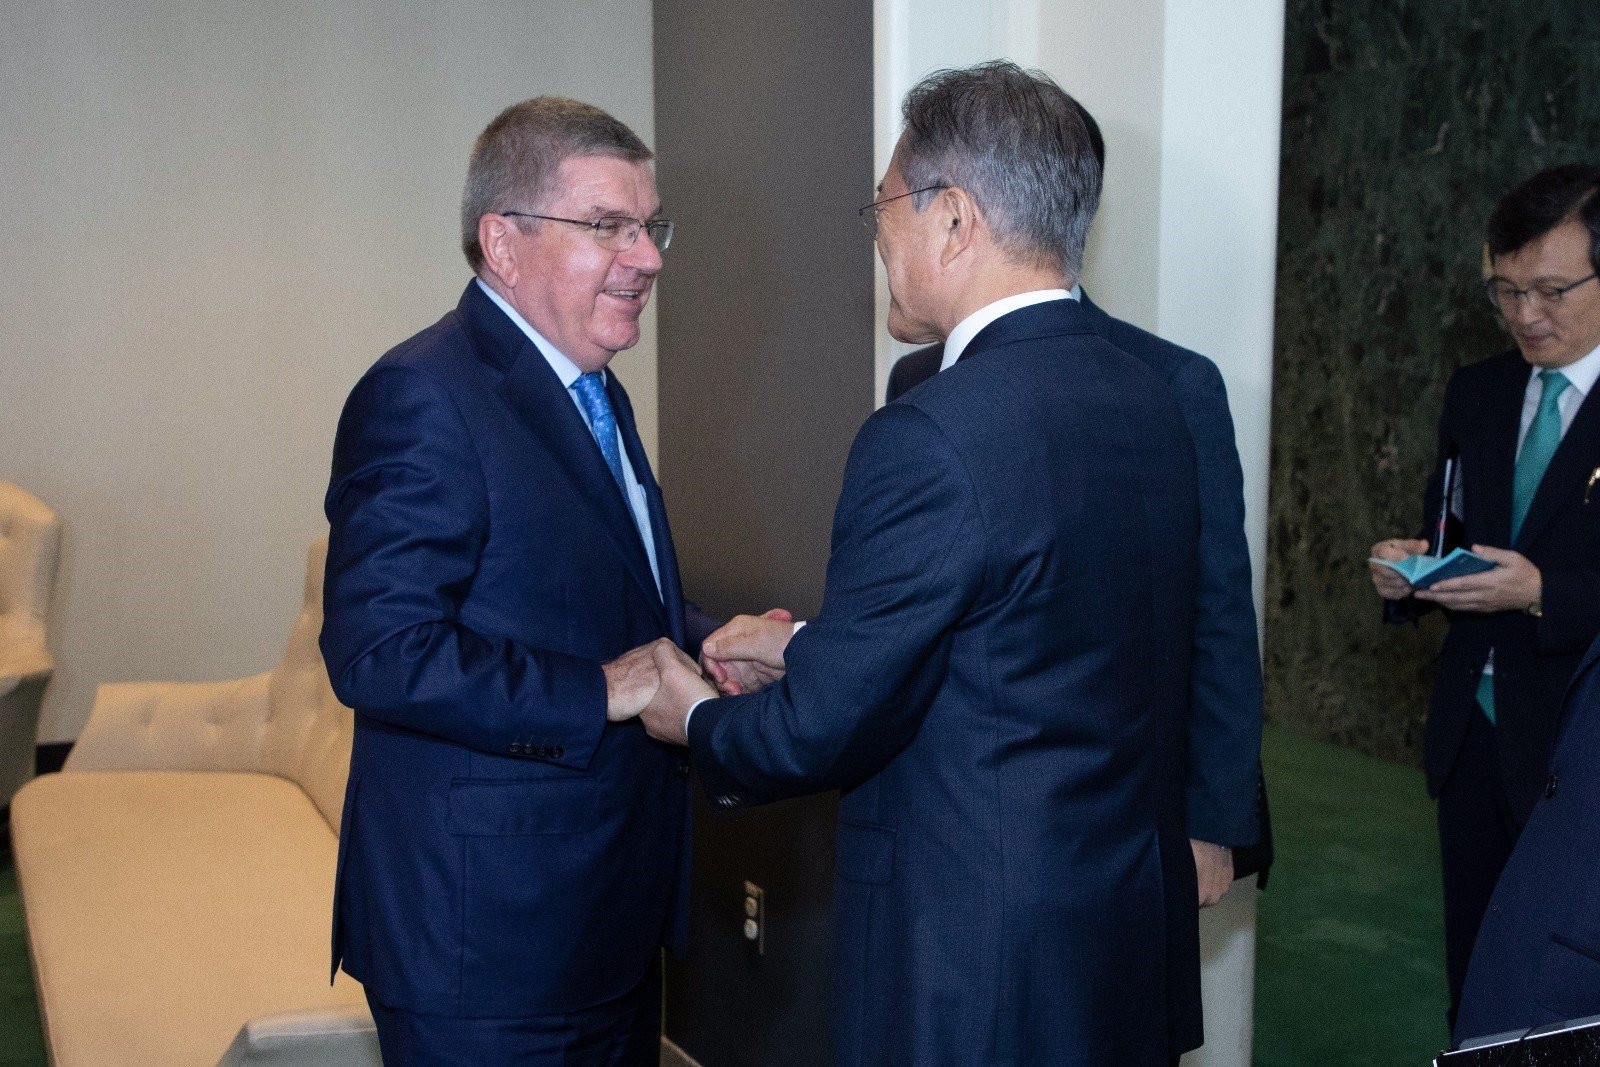 IOC President Thomas Bach held talks in Seoul last month regarding the joint bid for the 2032 Olympic and Paralympic Games with South Korean President Moon Jae-in ©IOC